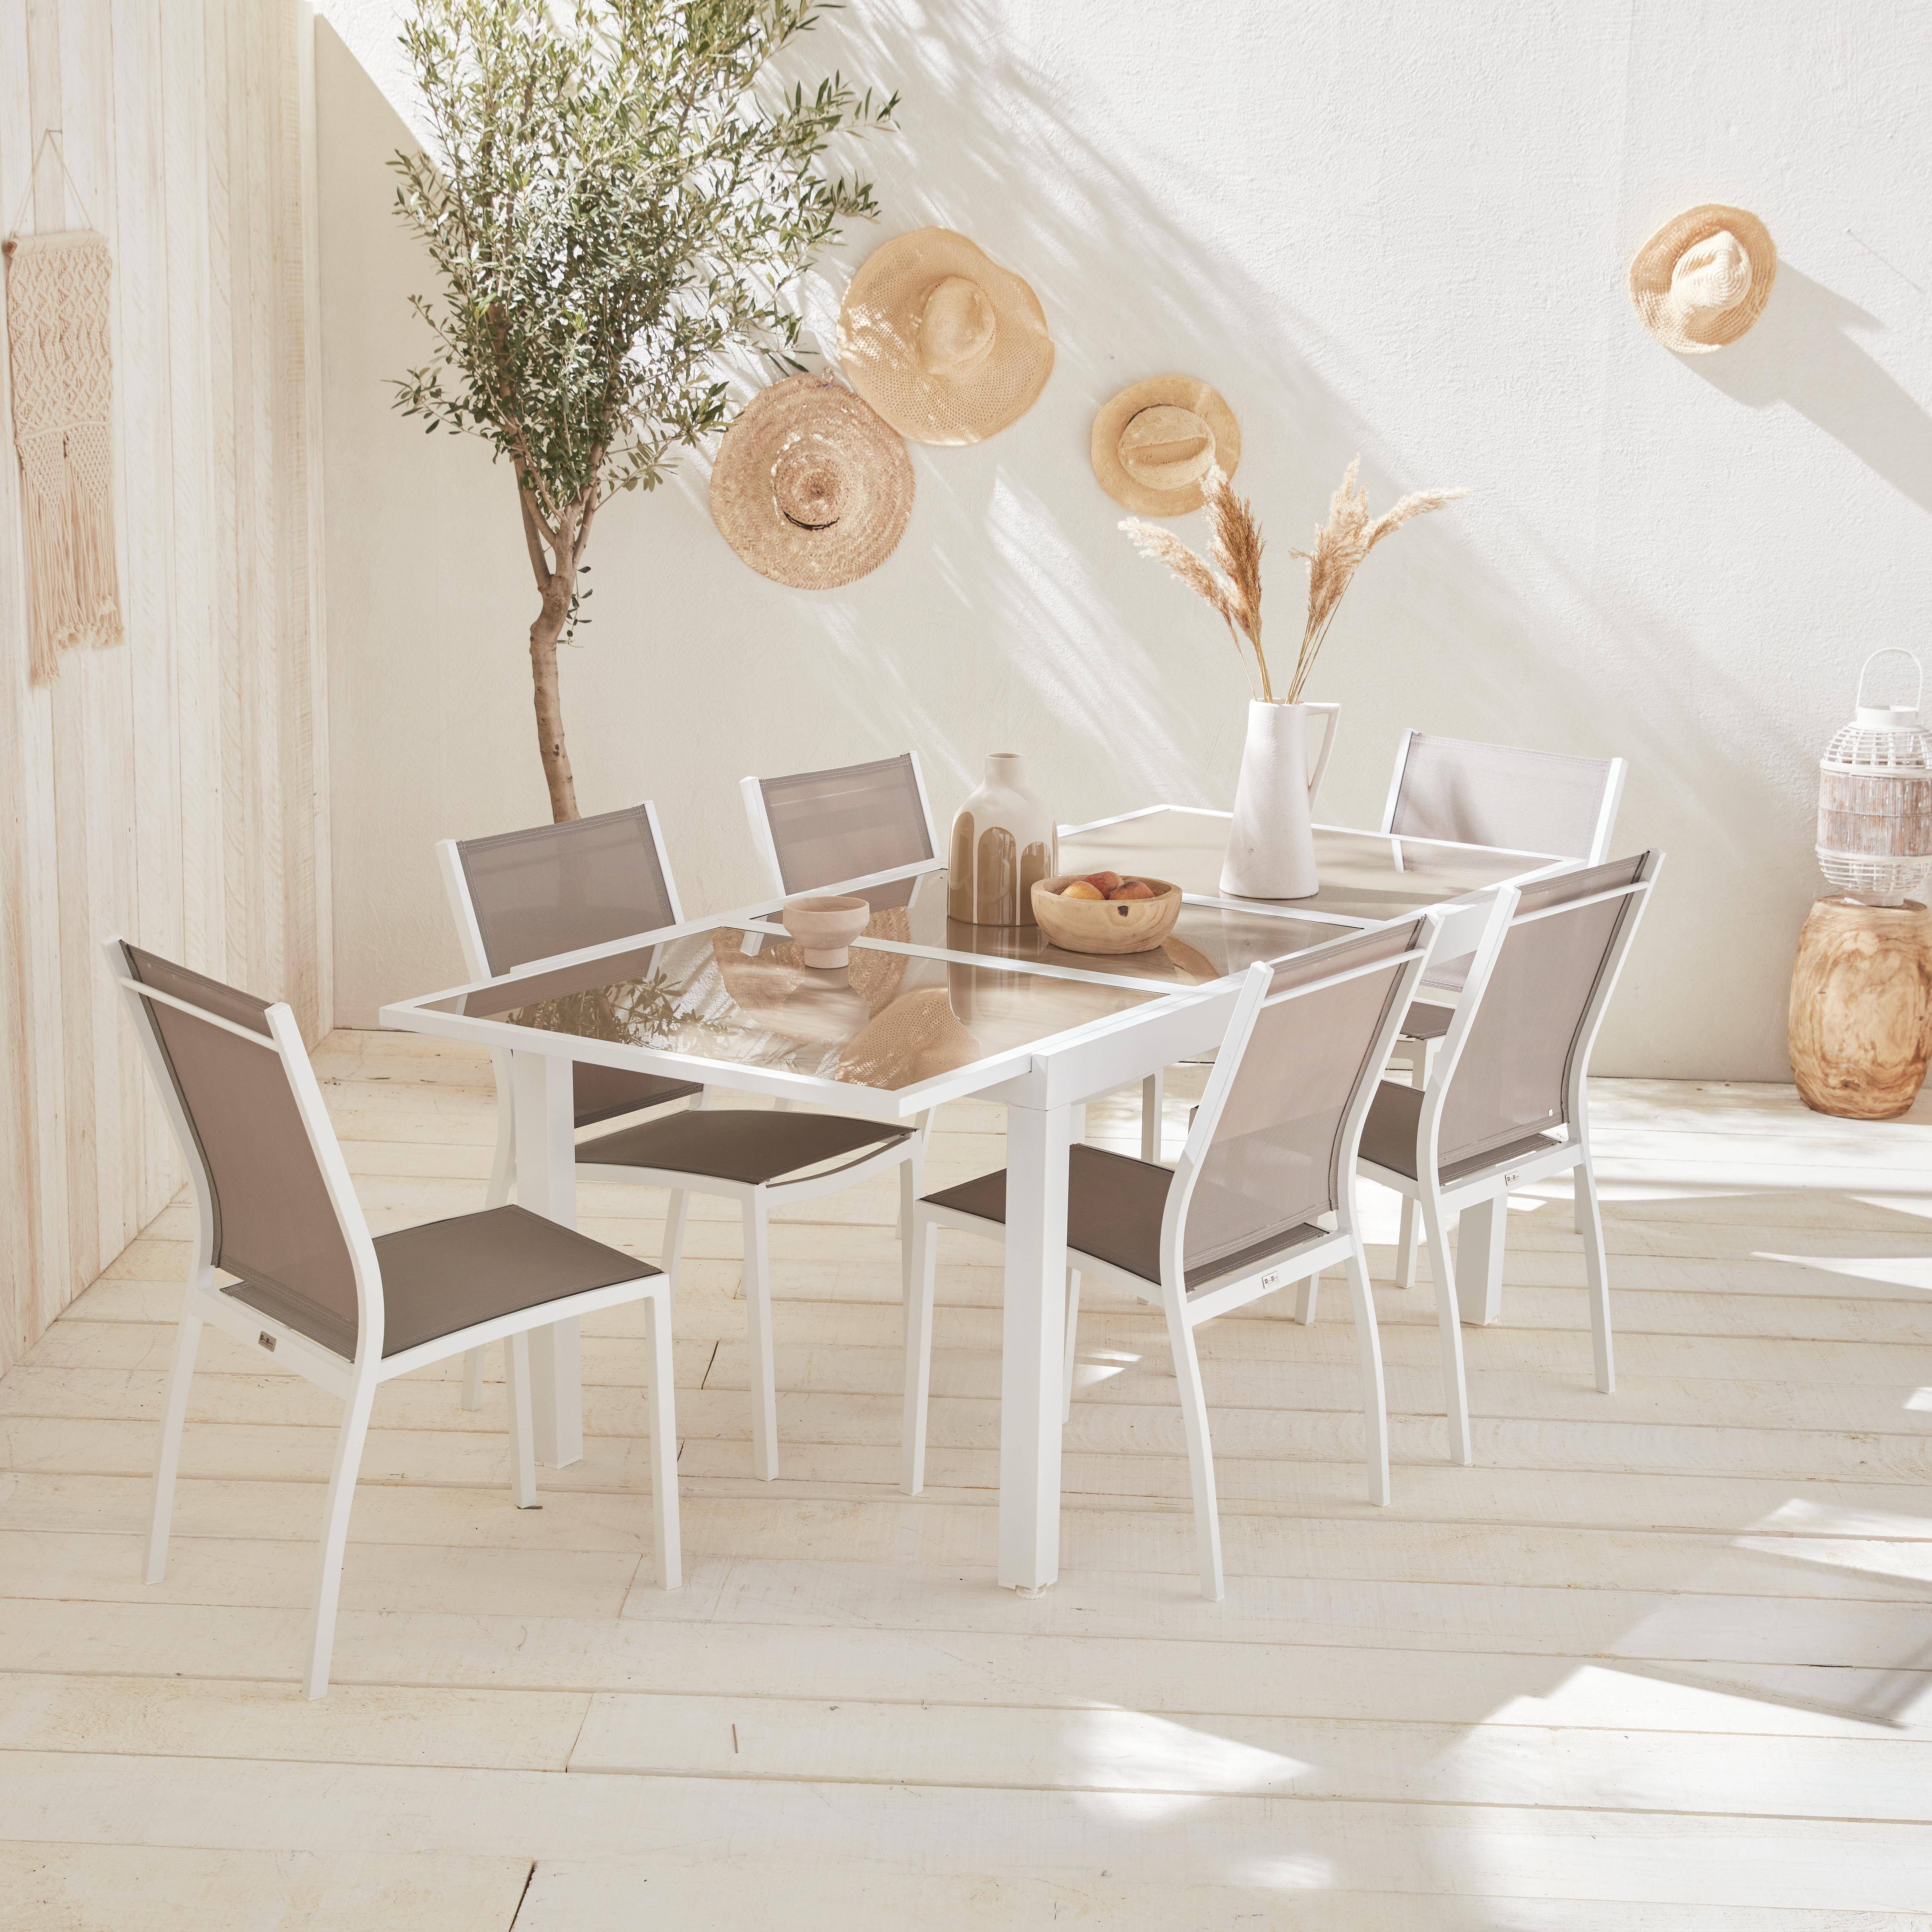 6-seater garden dining set, extendable 150-210cm aluminium table and 6 chairs - Orlando - White frame, Beige-Brown textilene,sweeek,Photo1